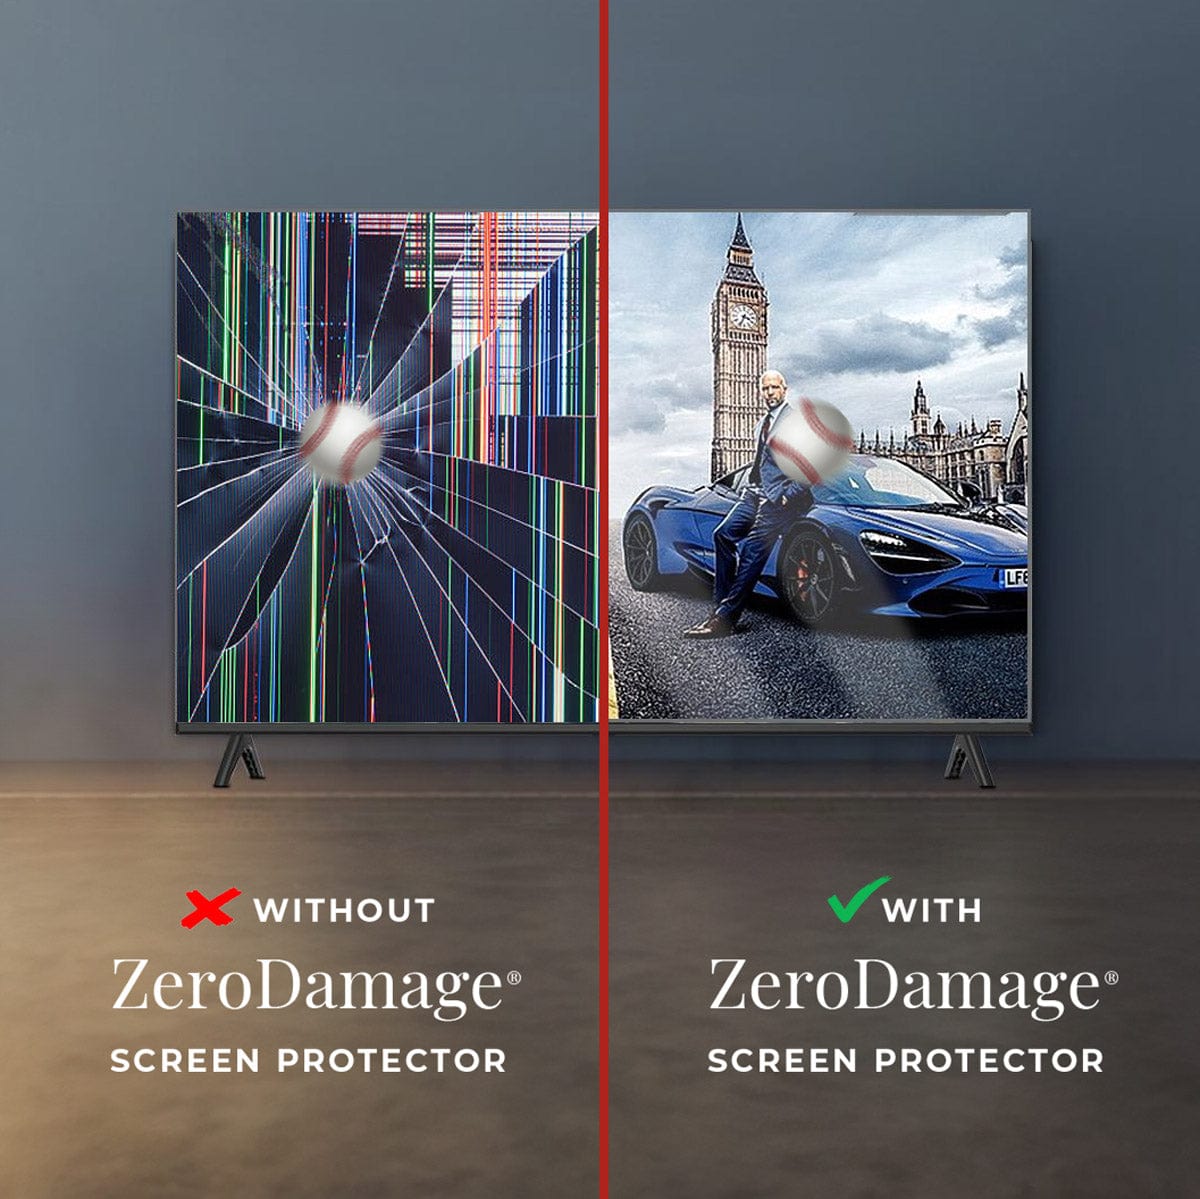 ZeroDamage Clear TV Screen Protector for Most 43" TVs